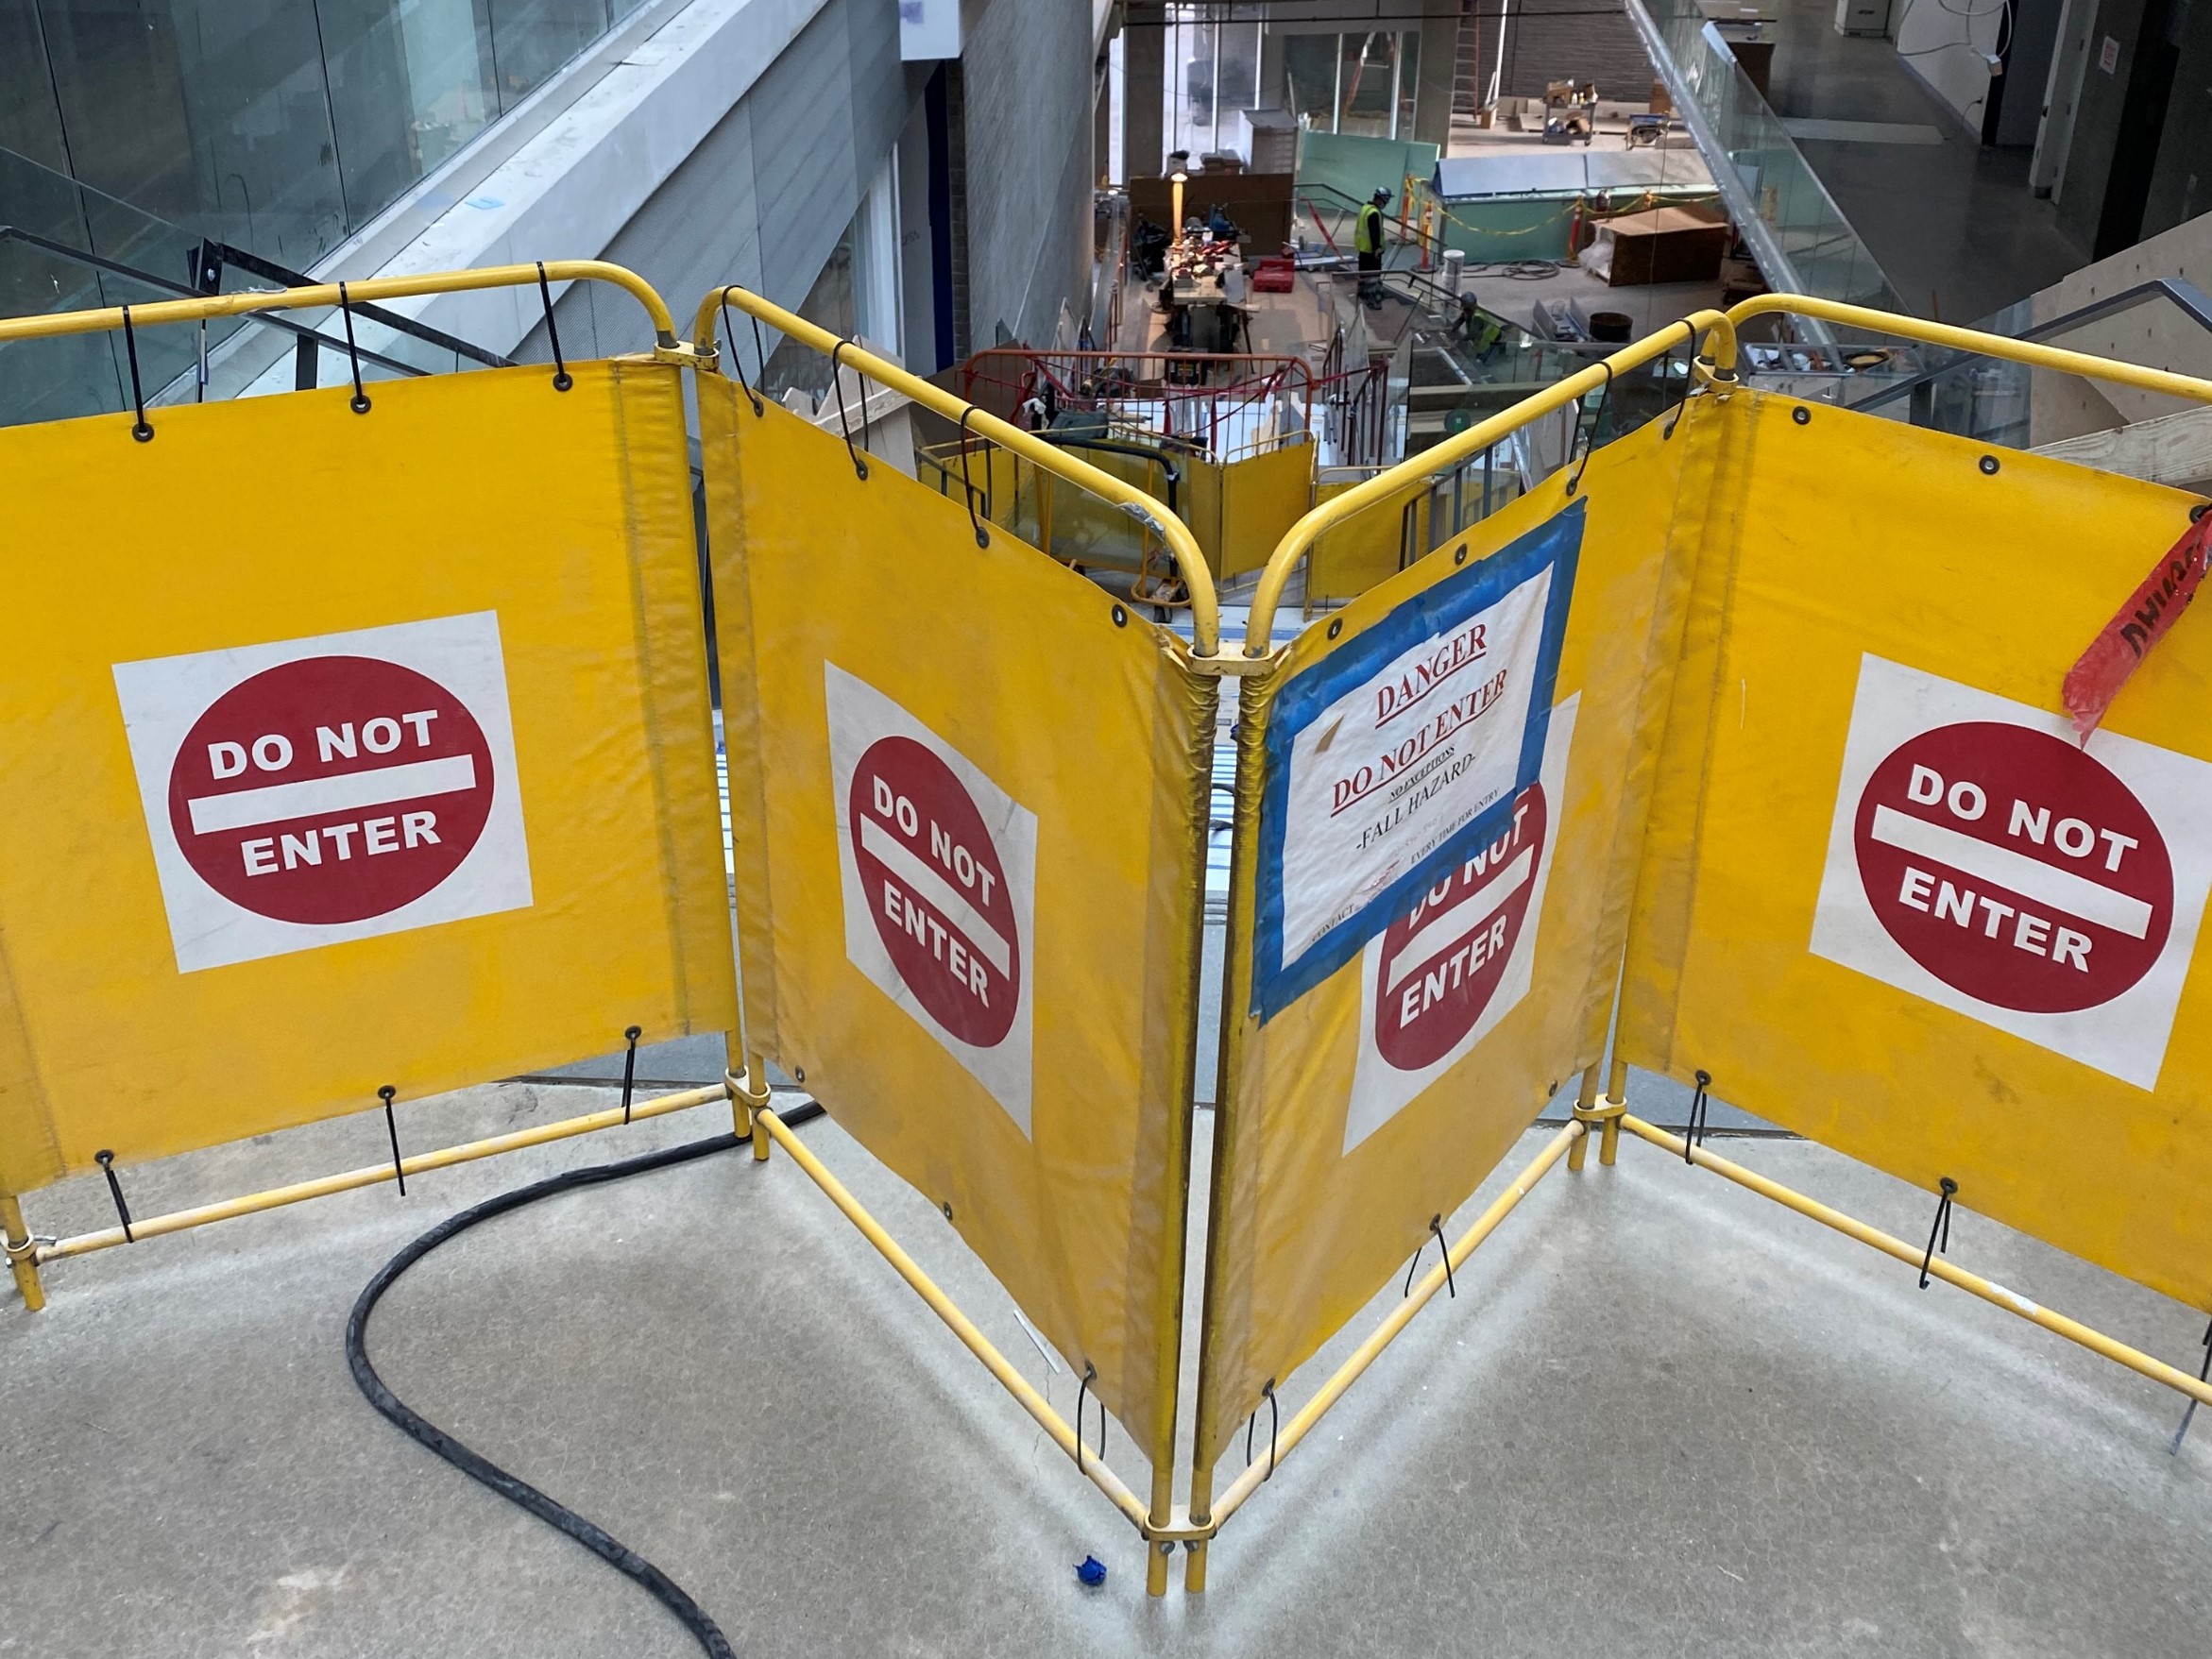 barricade blocking stair use with signage to protect from fall hazard exposure